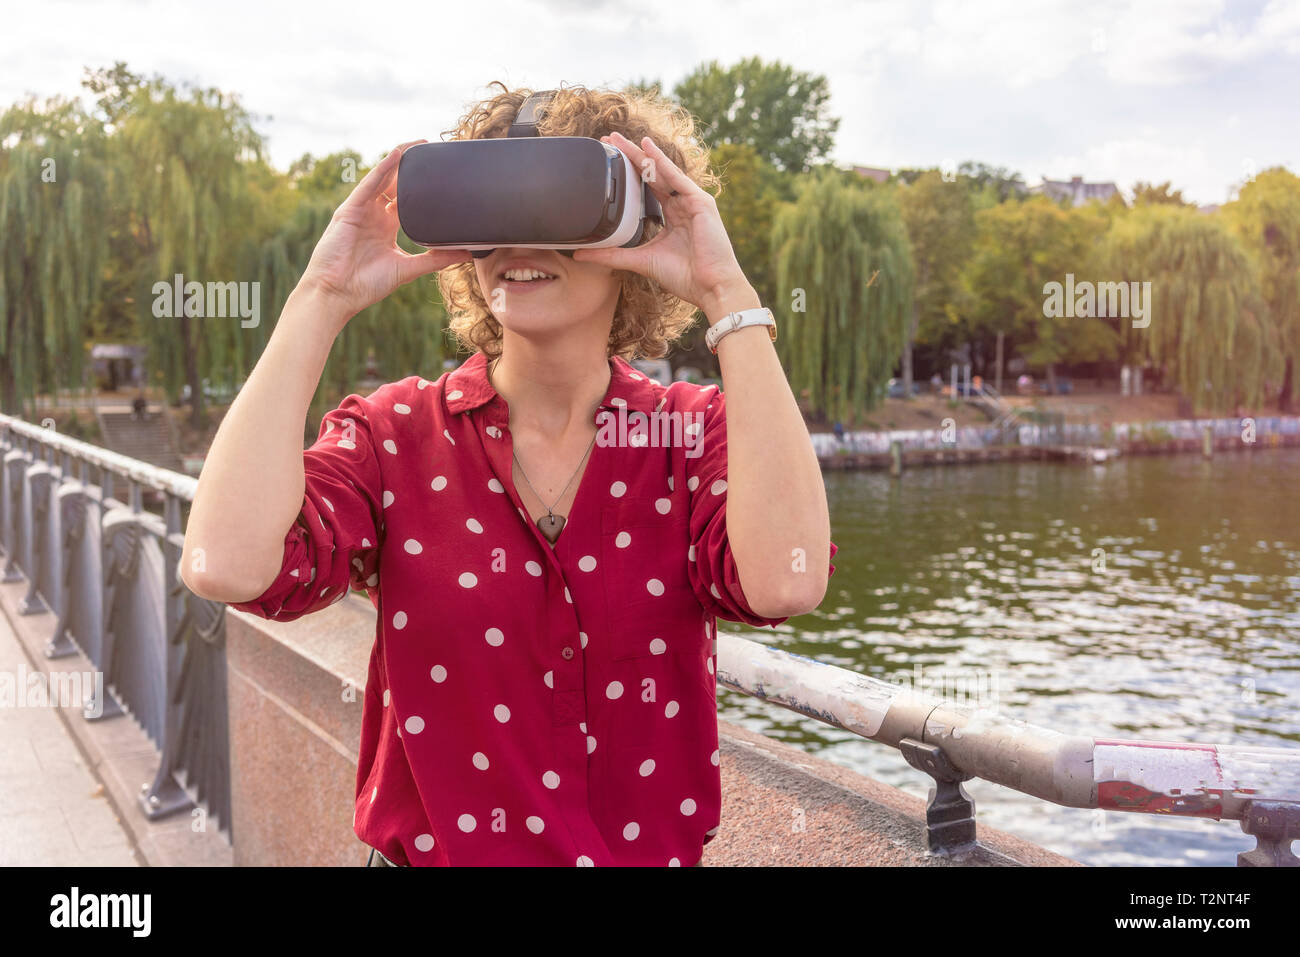 Young woman using VR headset on bridge, river in background, Berlin, Germany Stock Photo